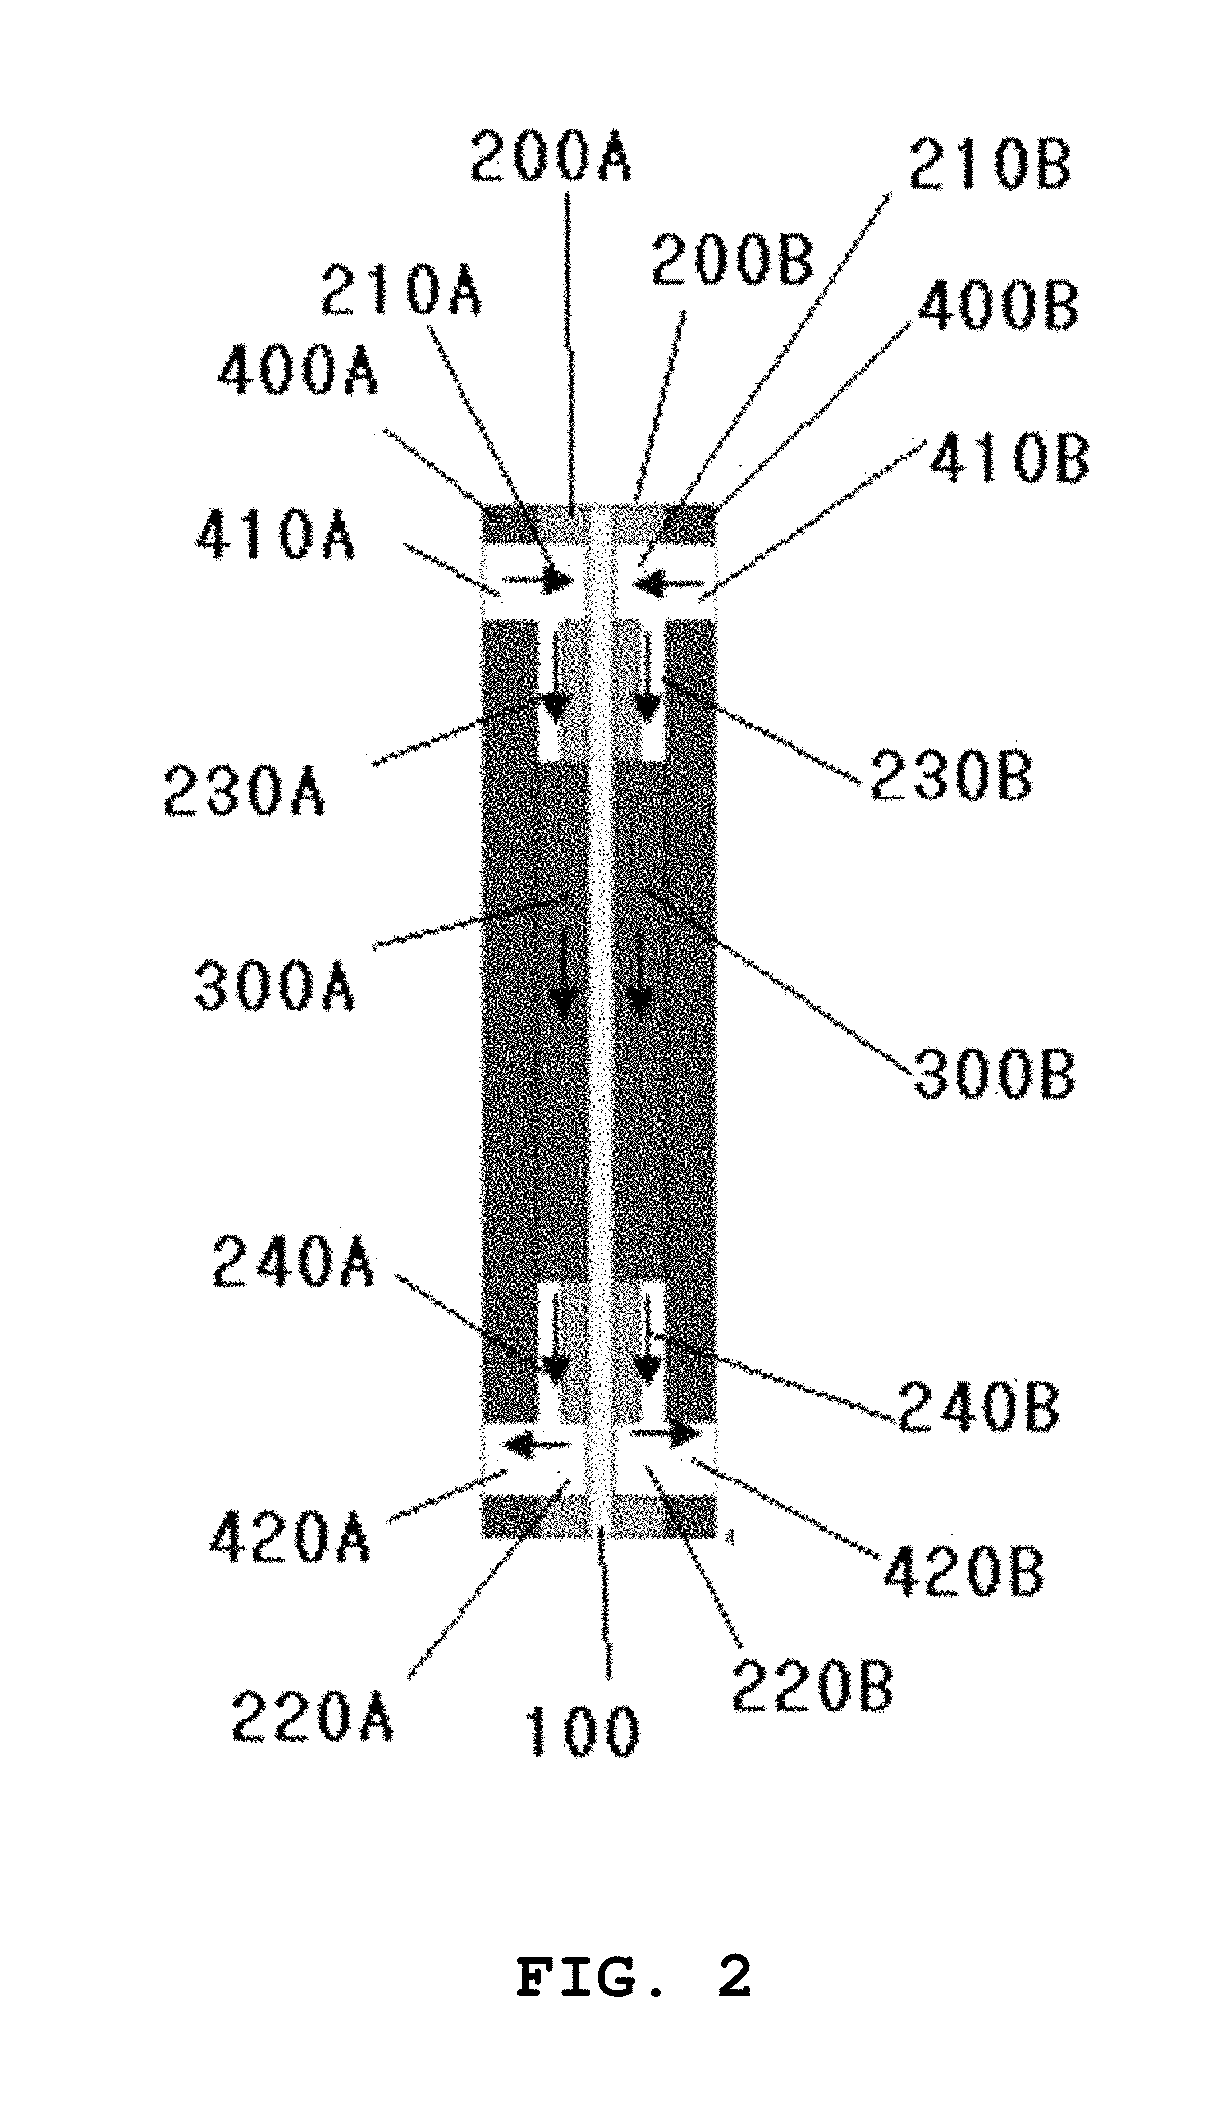 Unit cell for redox flow battery, for reducing pressure drop caused by electrolyte flow in stack